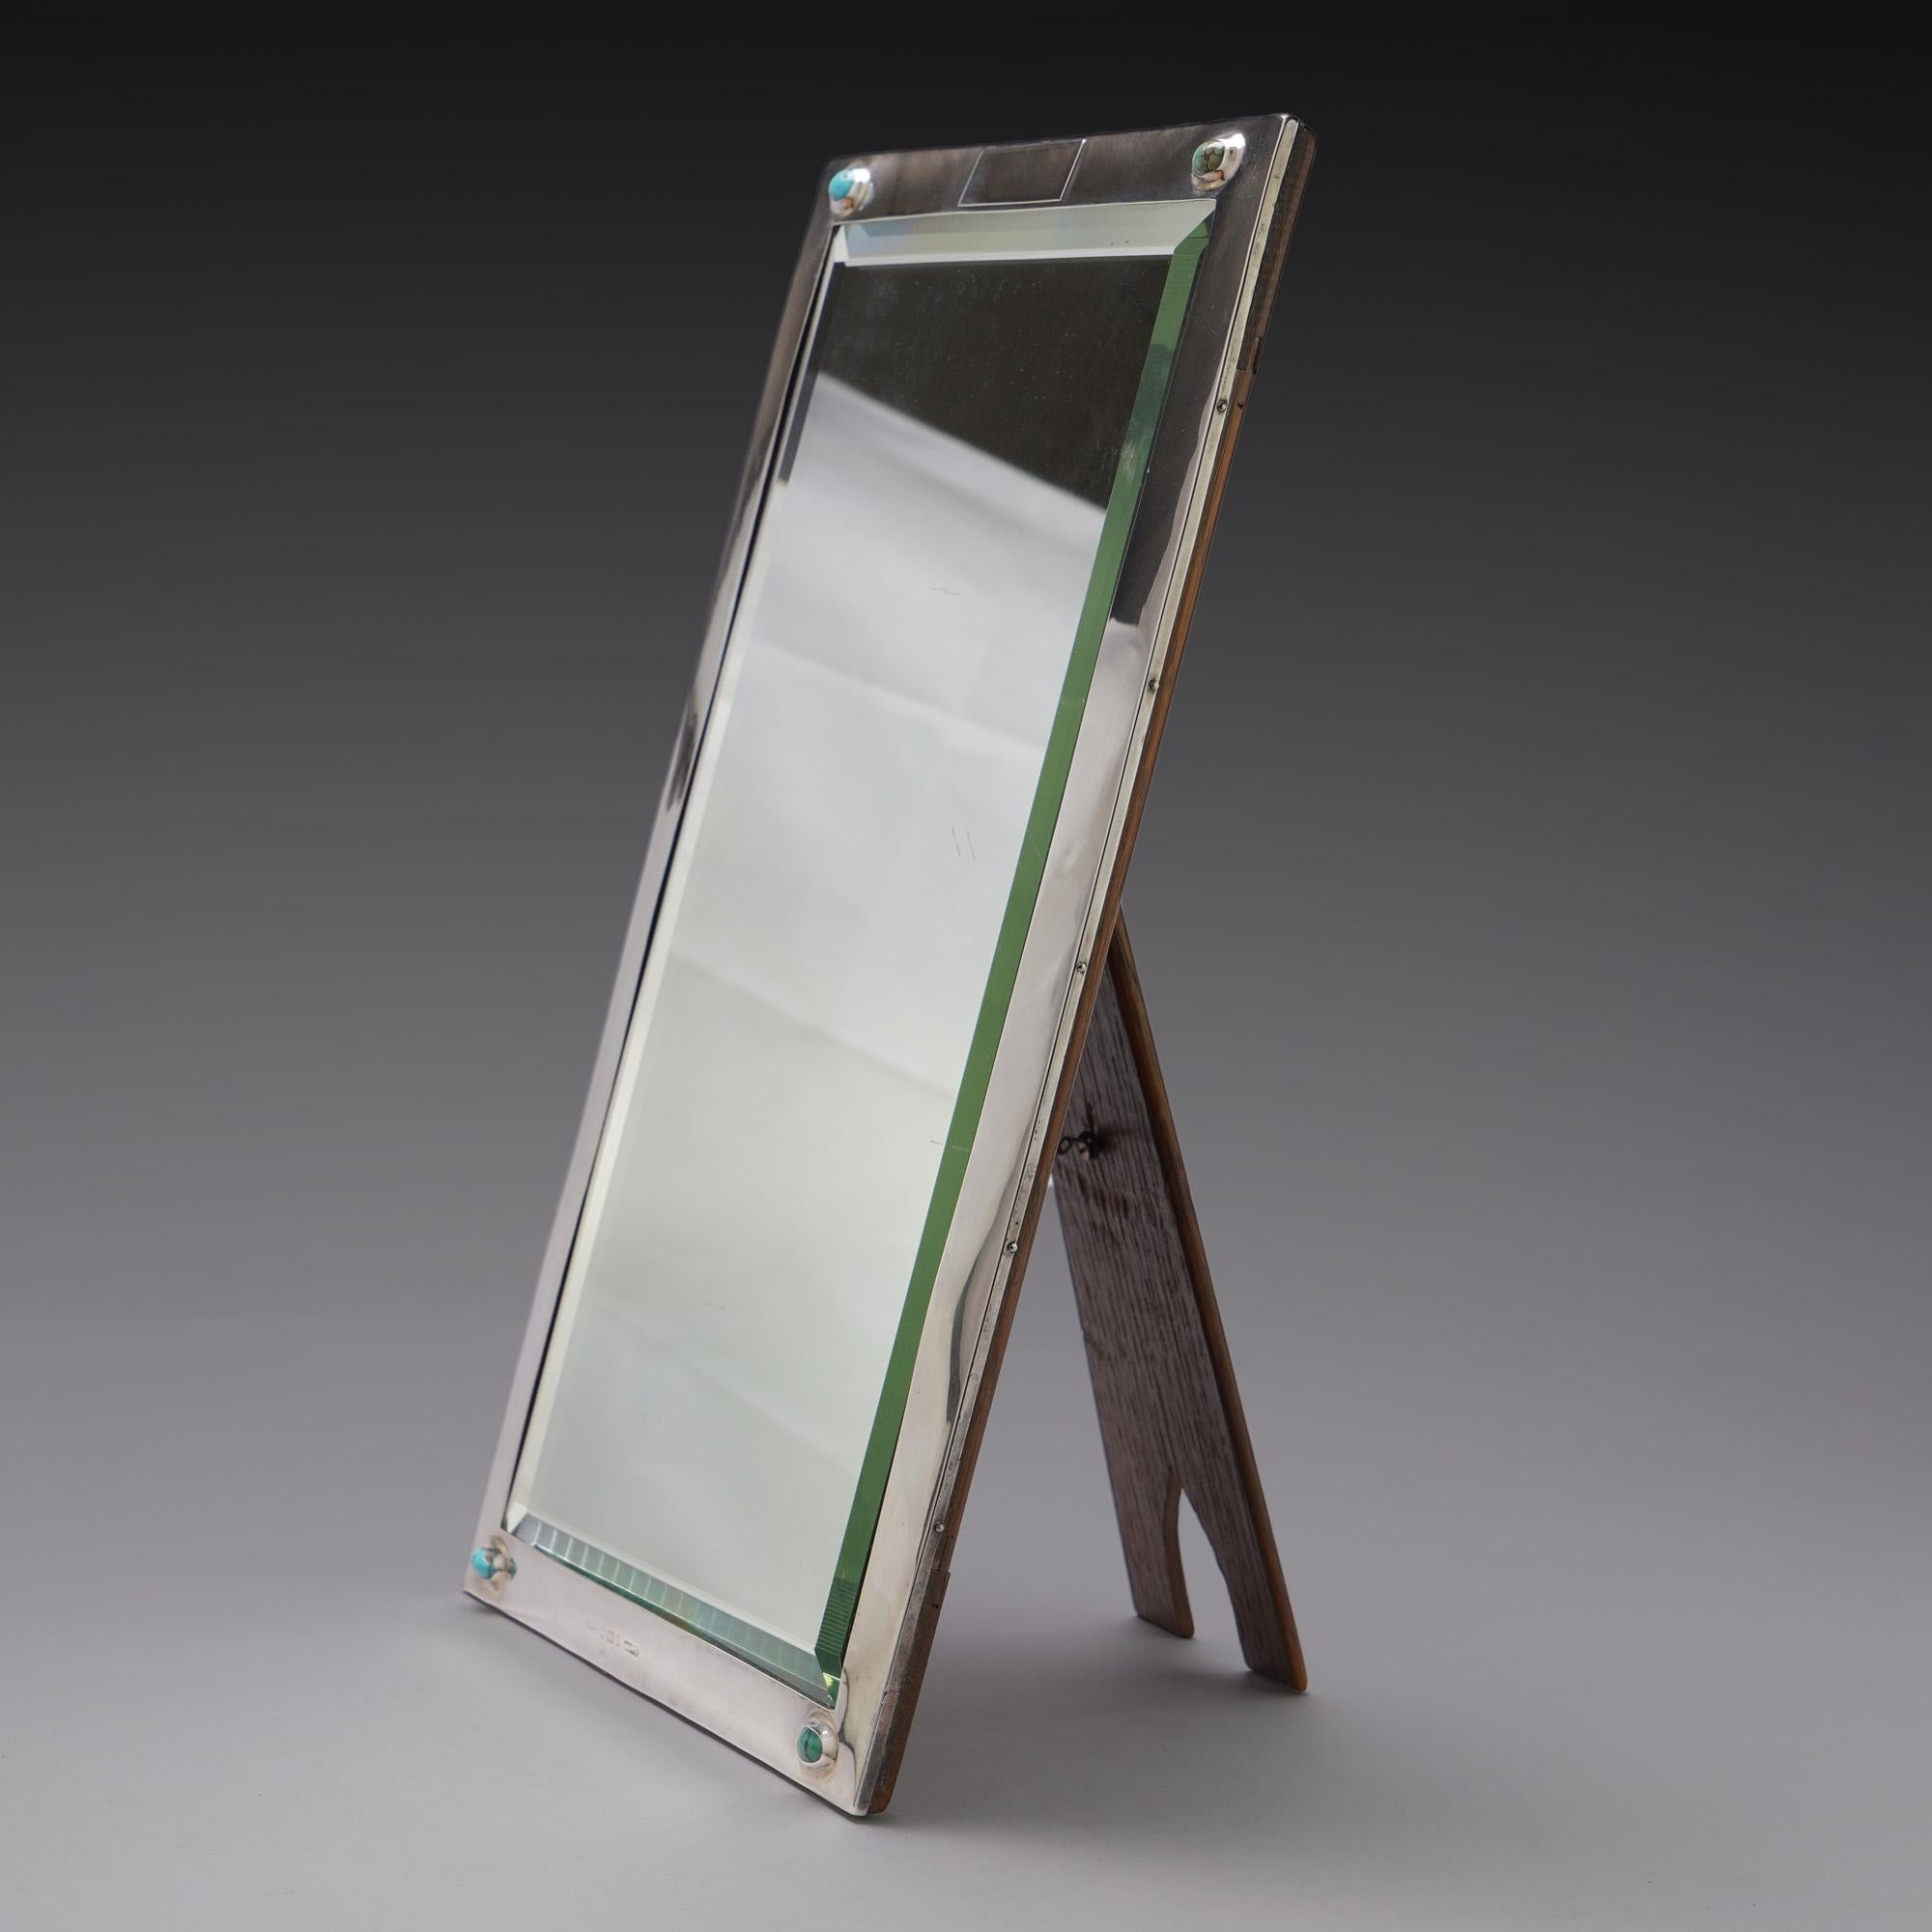 Liberty & Co. silver and turquoise table mirror with wooden back.
Made in England, London, 1900
Maker: Liberty & Co.
Fully hallmarked.

Dimensions:
Size 33.8 x 21.5 x 16.5 cm
Weight 1230 grams

Condition: Mirror has some general wear and